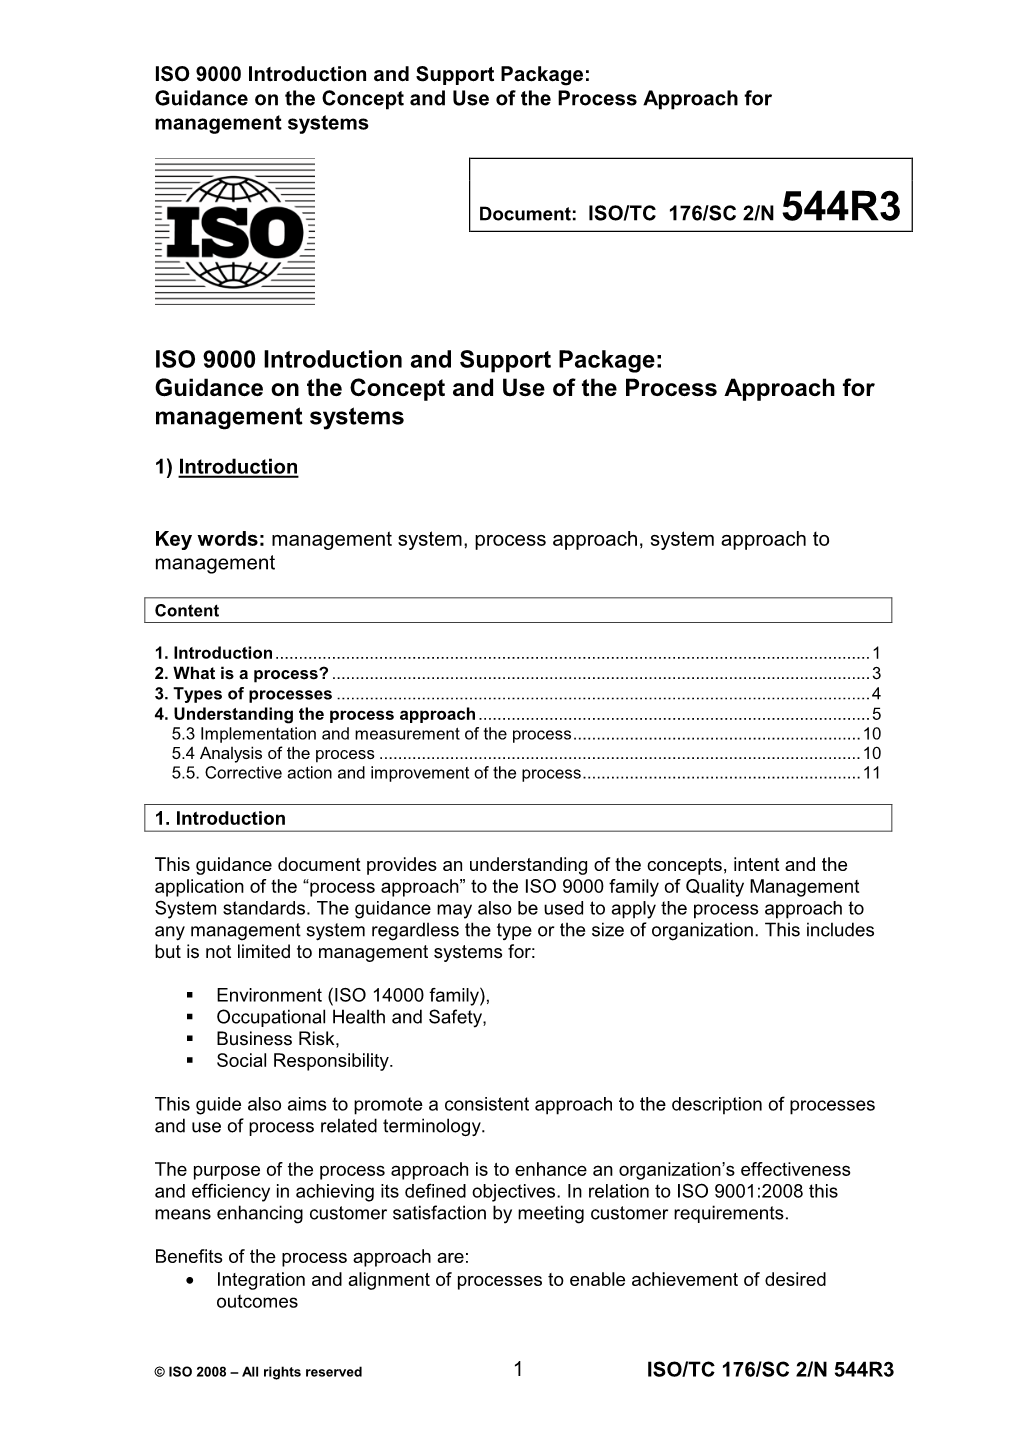 Concept and Use of the Process Approach for Management Systems